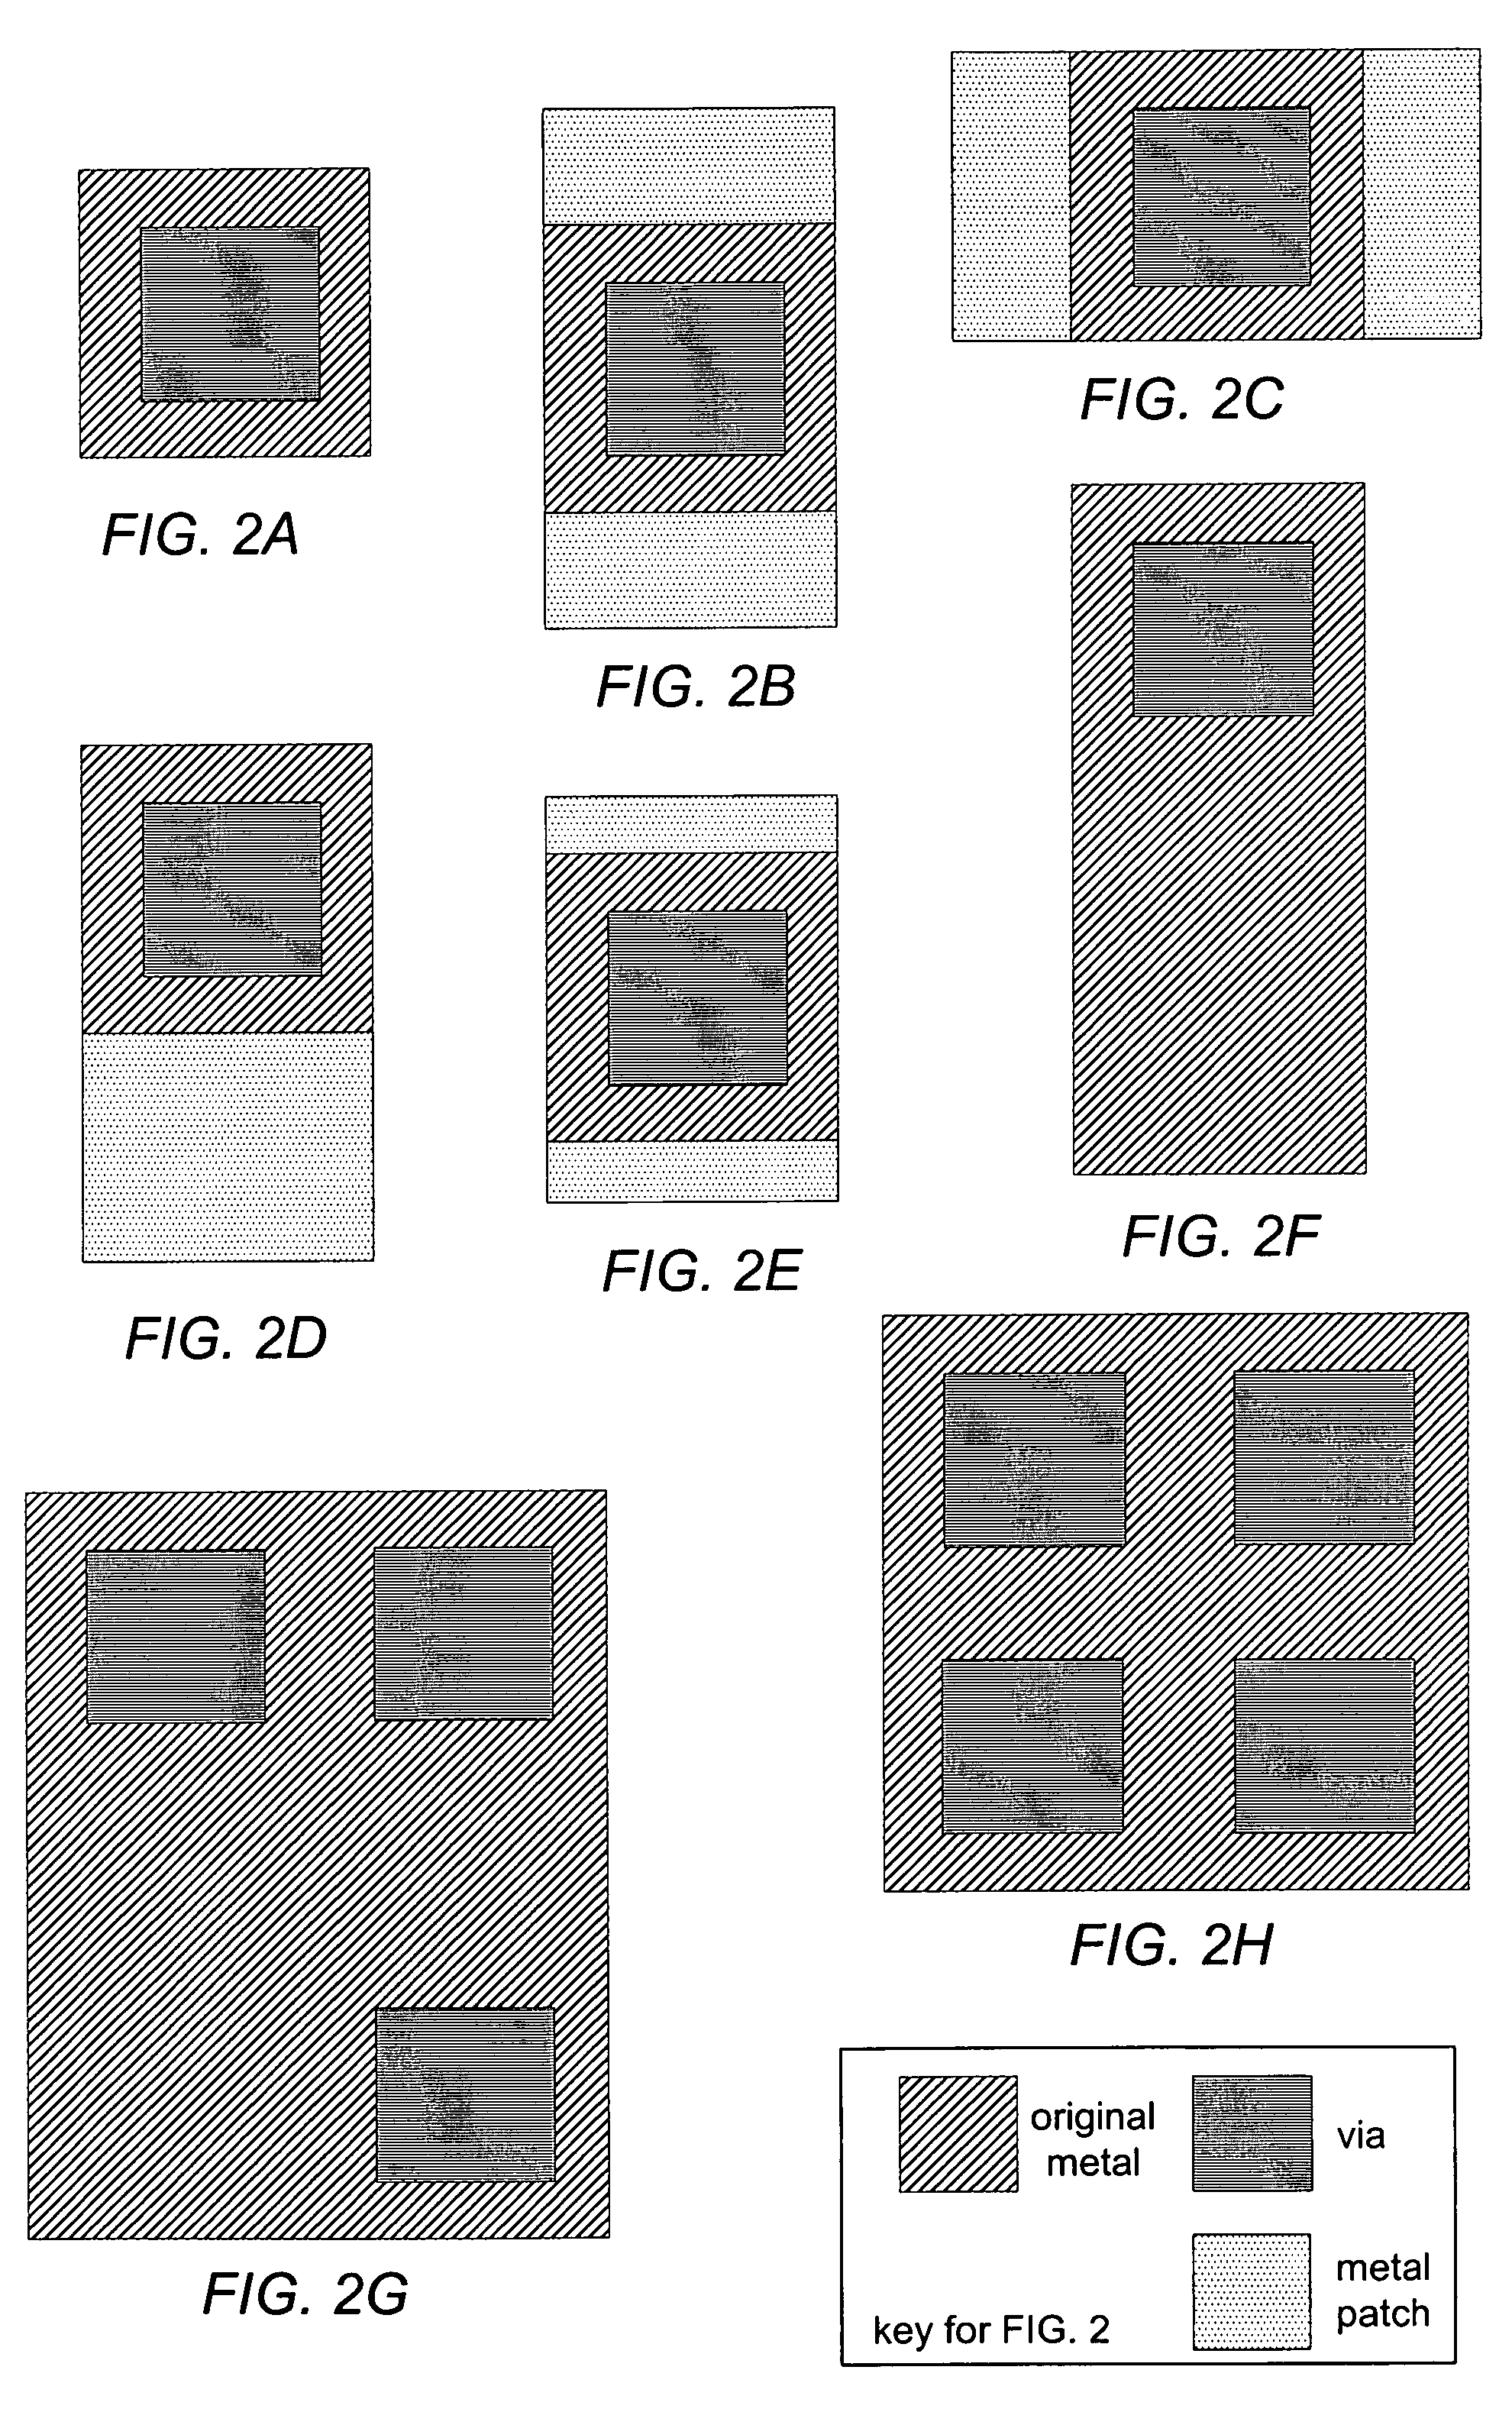 Automated correction of asymmetric enclosure rule violations in a design layout